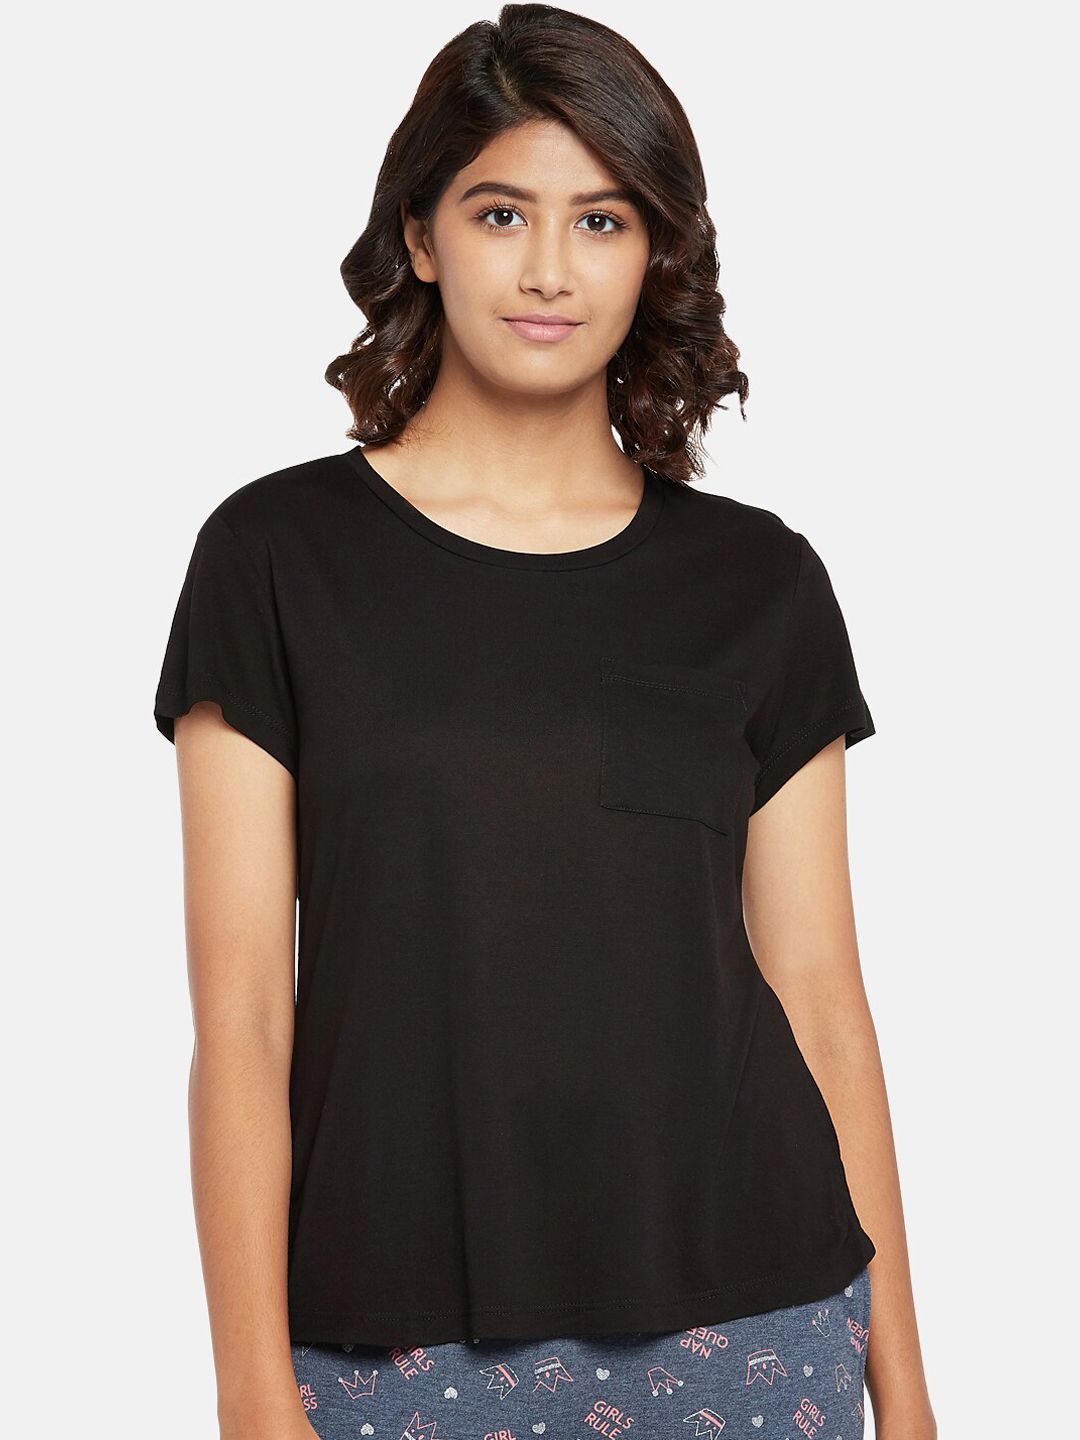 Dreamz by Pantaloons Black Solid Regular Lounge tshirt Price in India